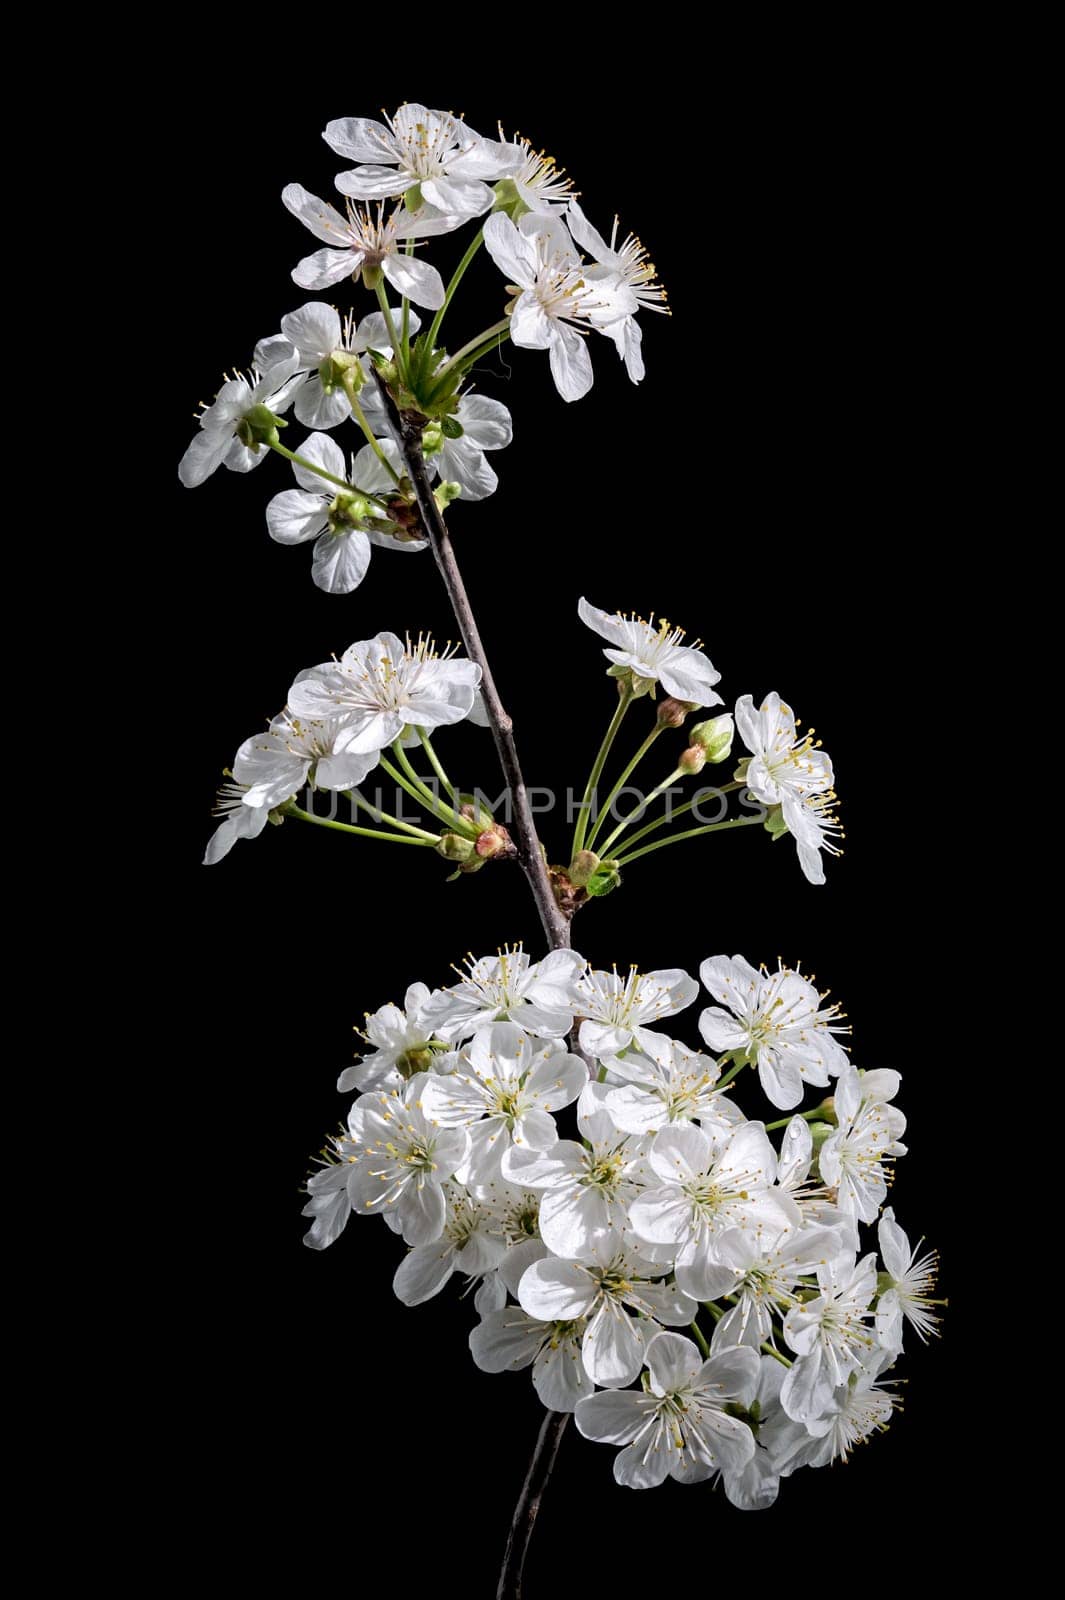 Blooming white cherry tree flowers on a black background by Multipedia